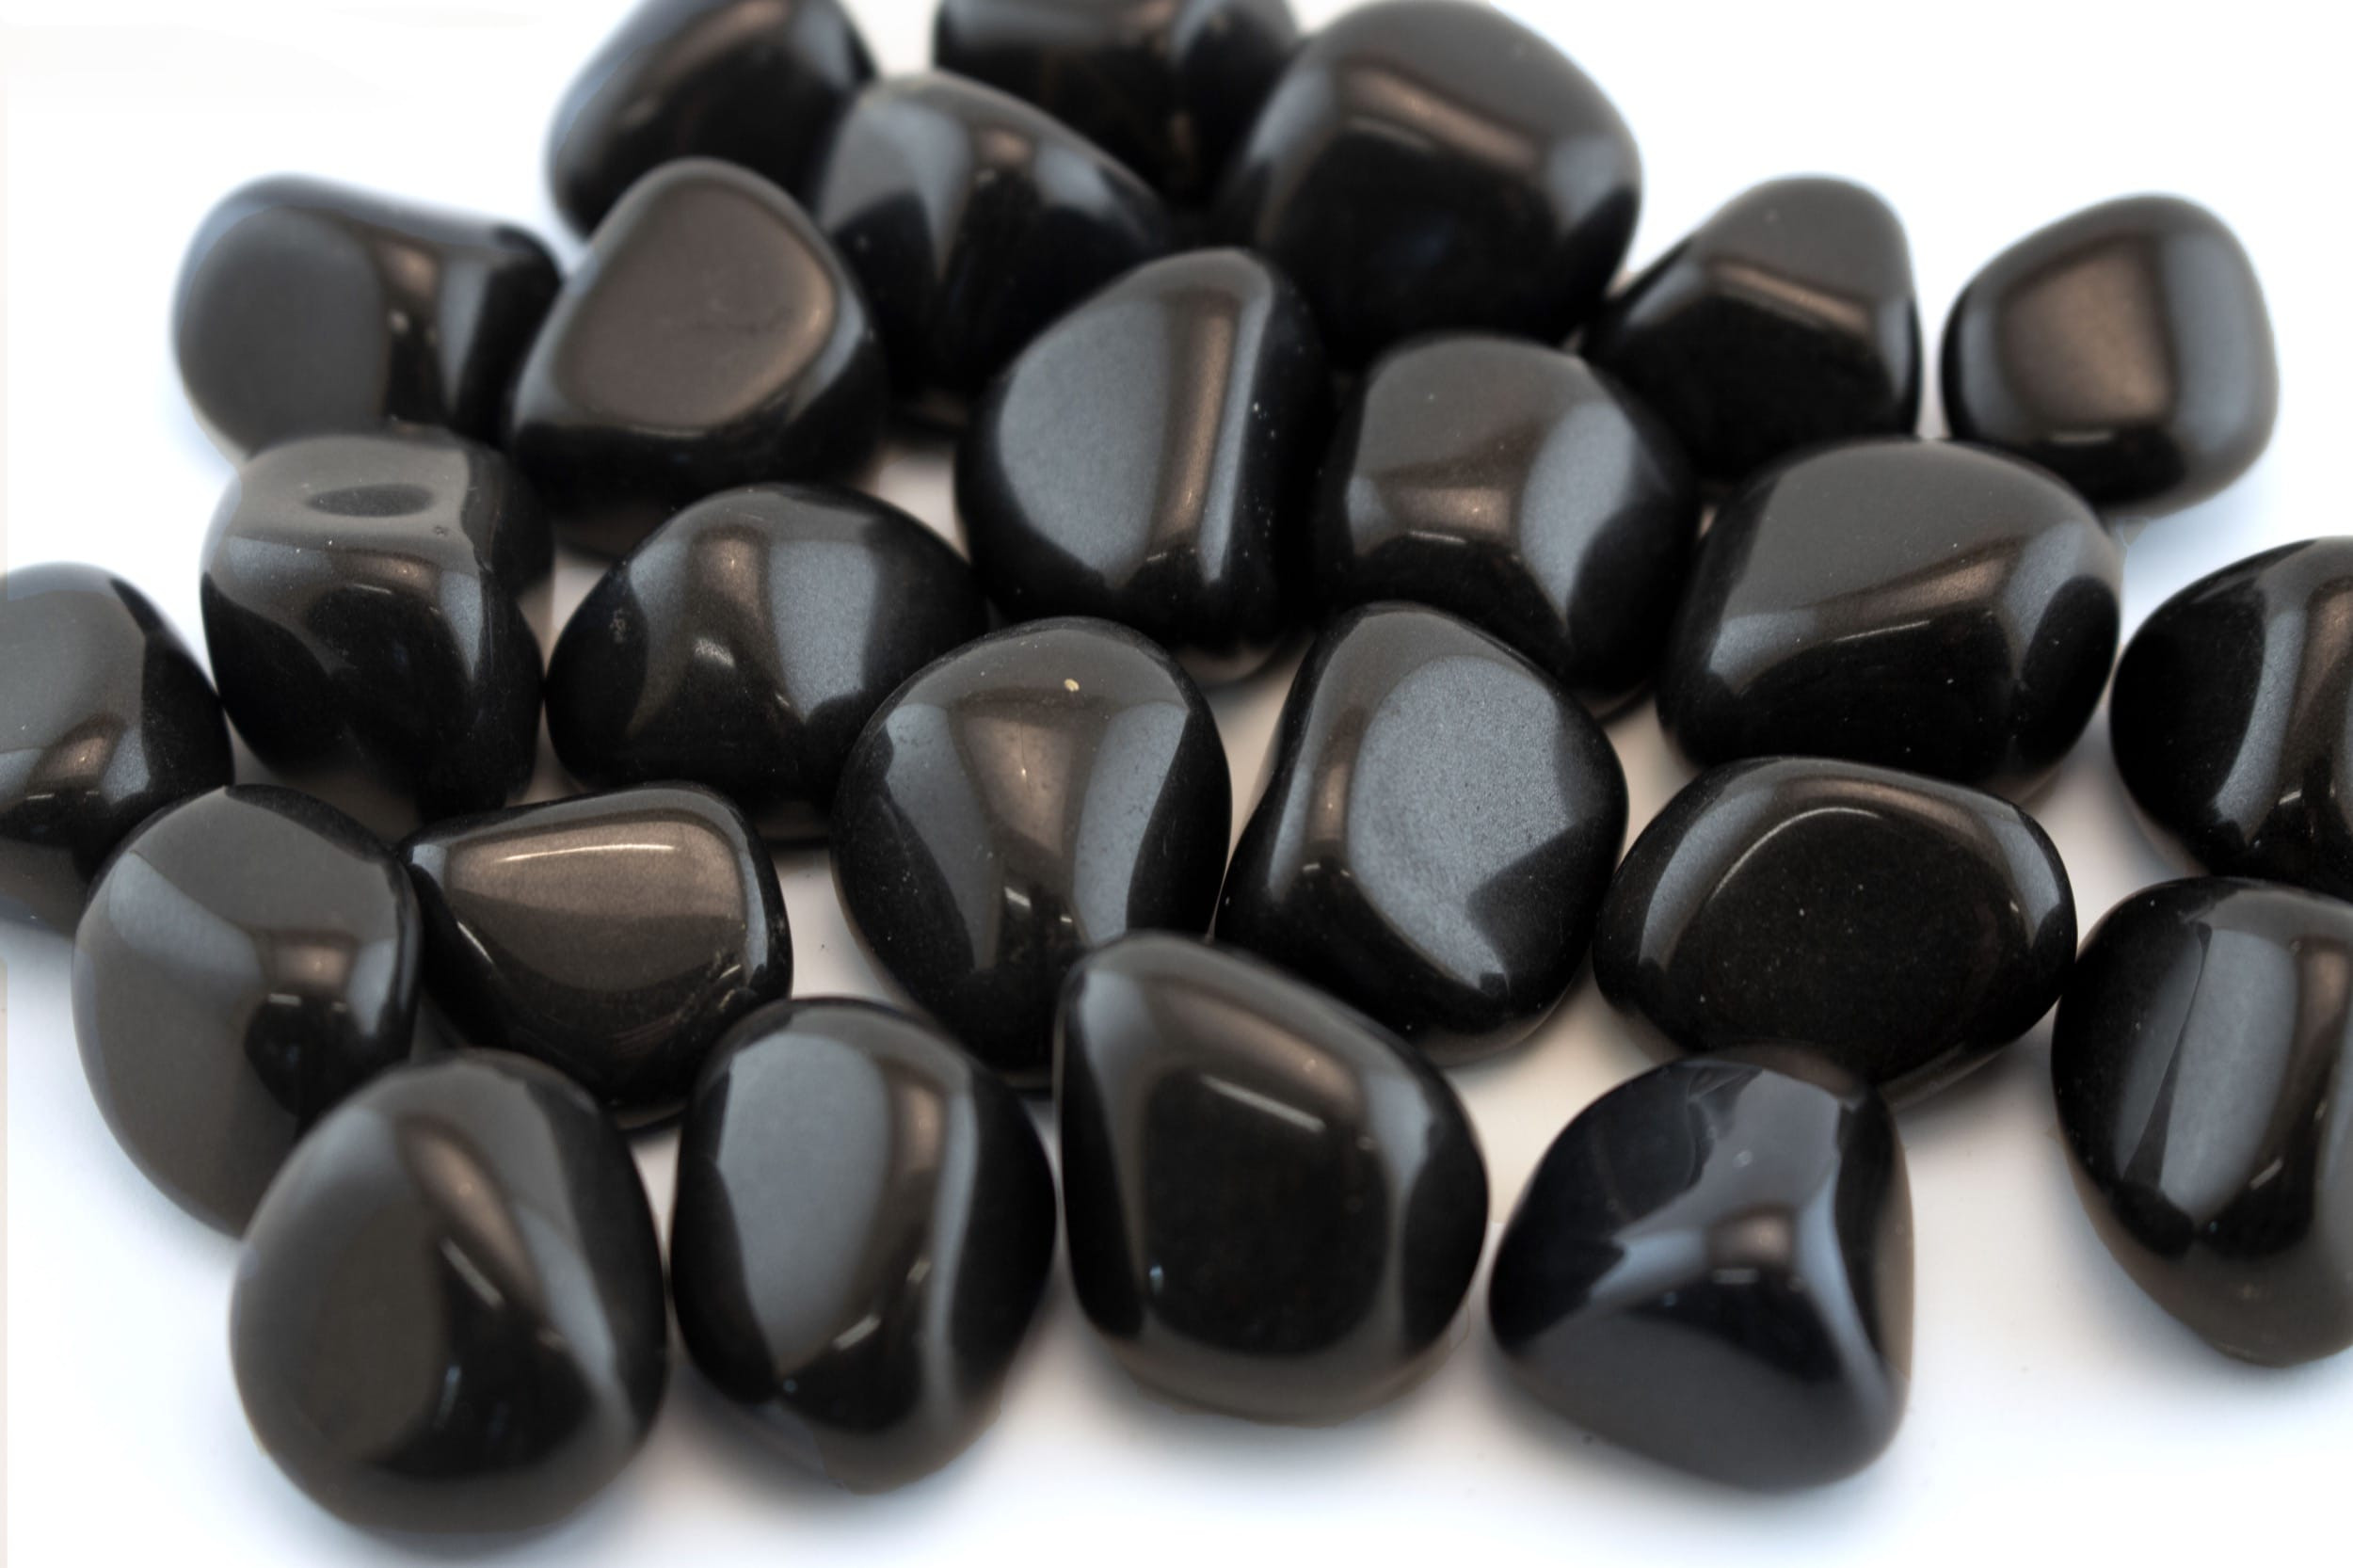 Black Onyx Birthstone - Know More Of This Stone That Has A Sinister Reputation